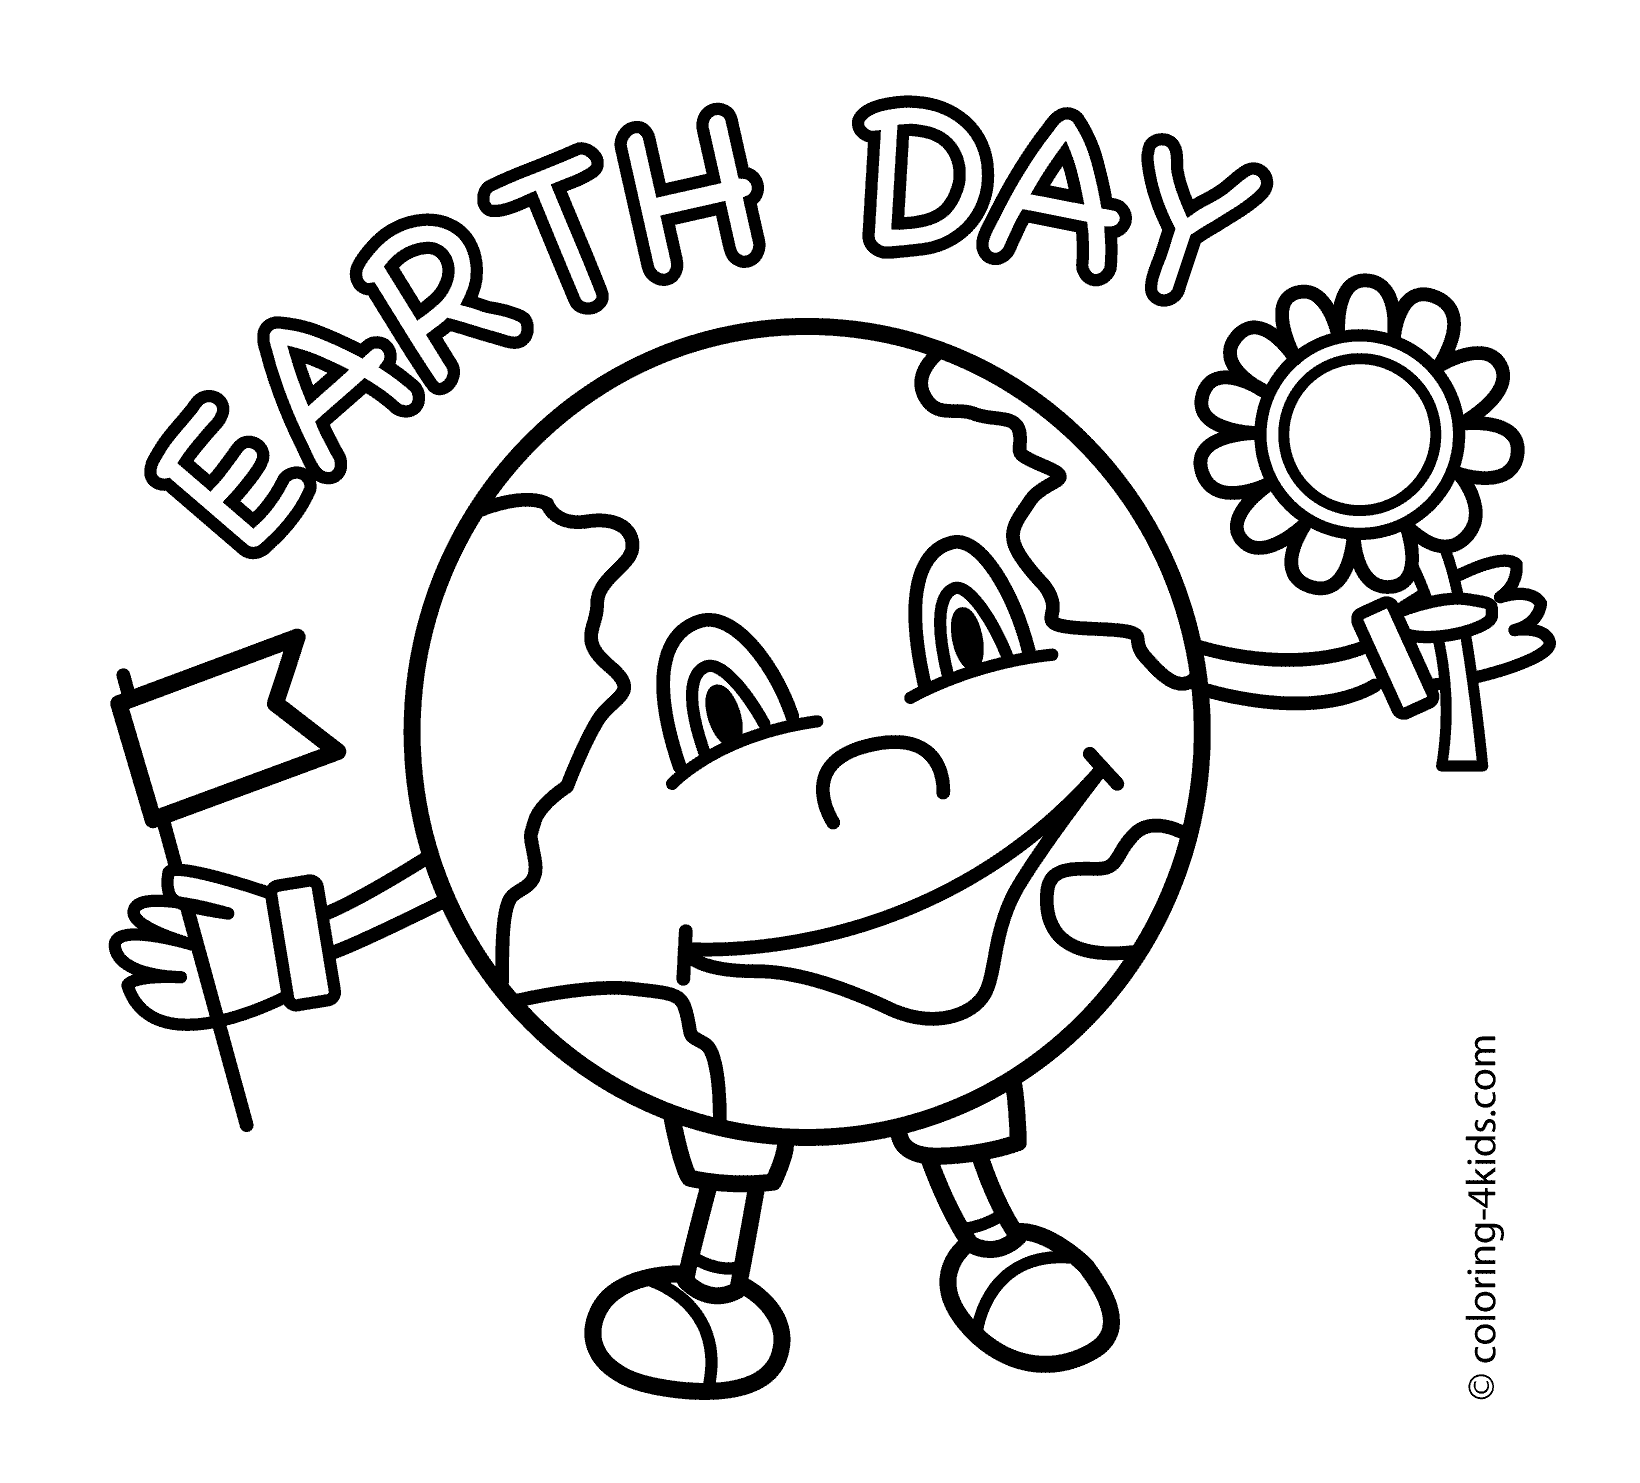 earth day 2009 coloring pages - photo #34